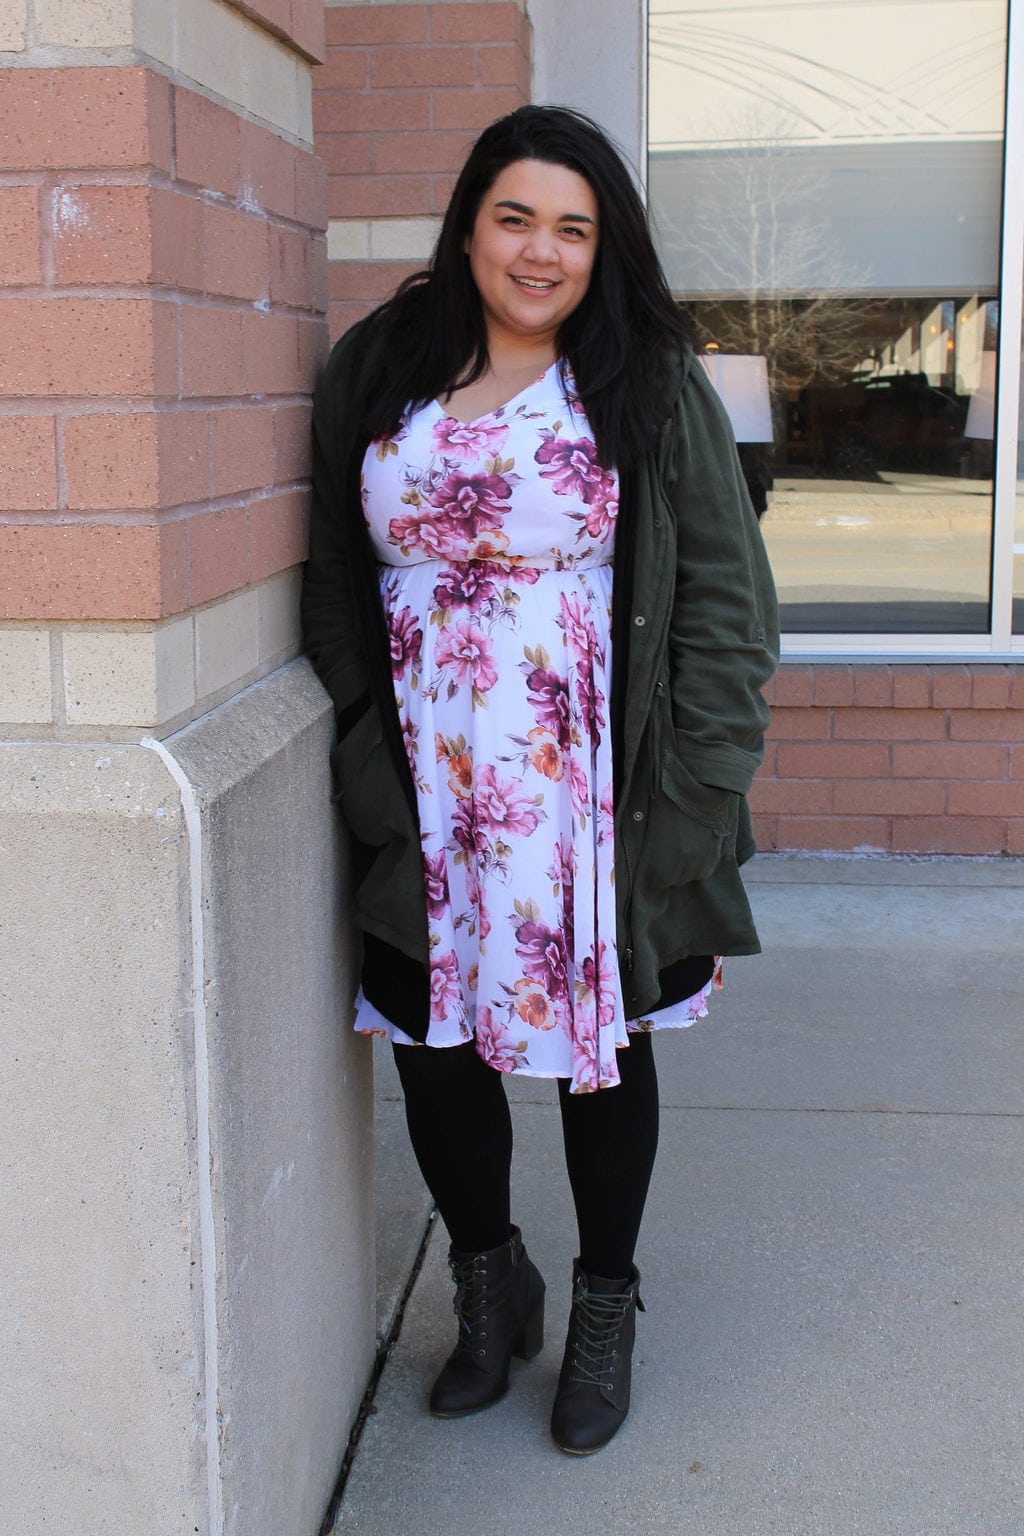 Katie wears a floral print sundress with an olive green jacket, black tights, and grey chunky-heeled lace-up booties.